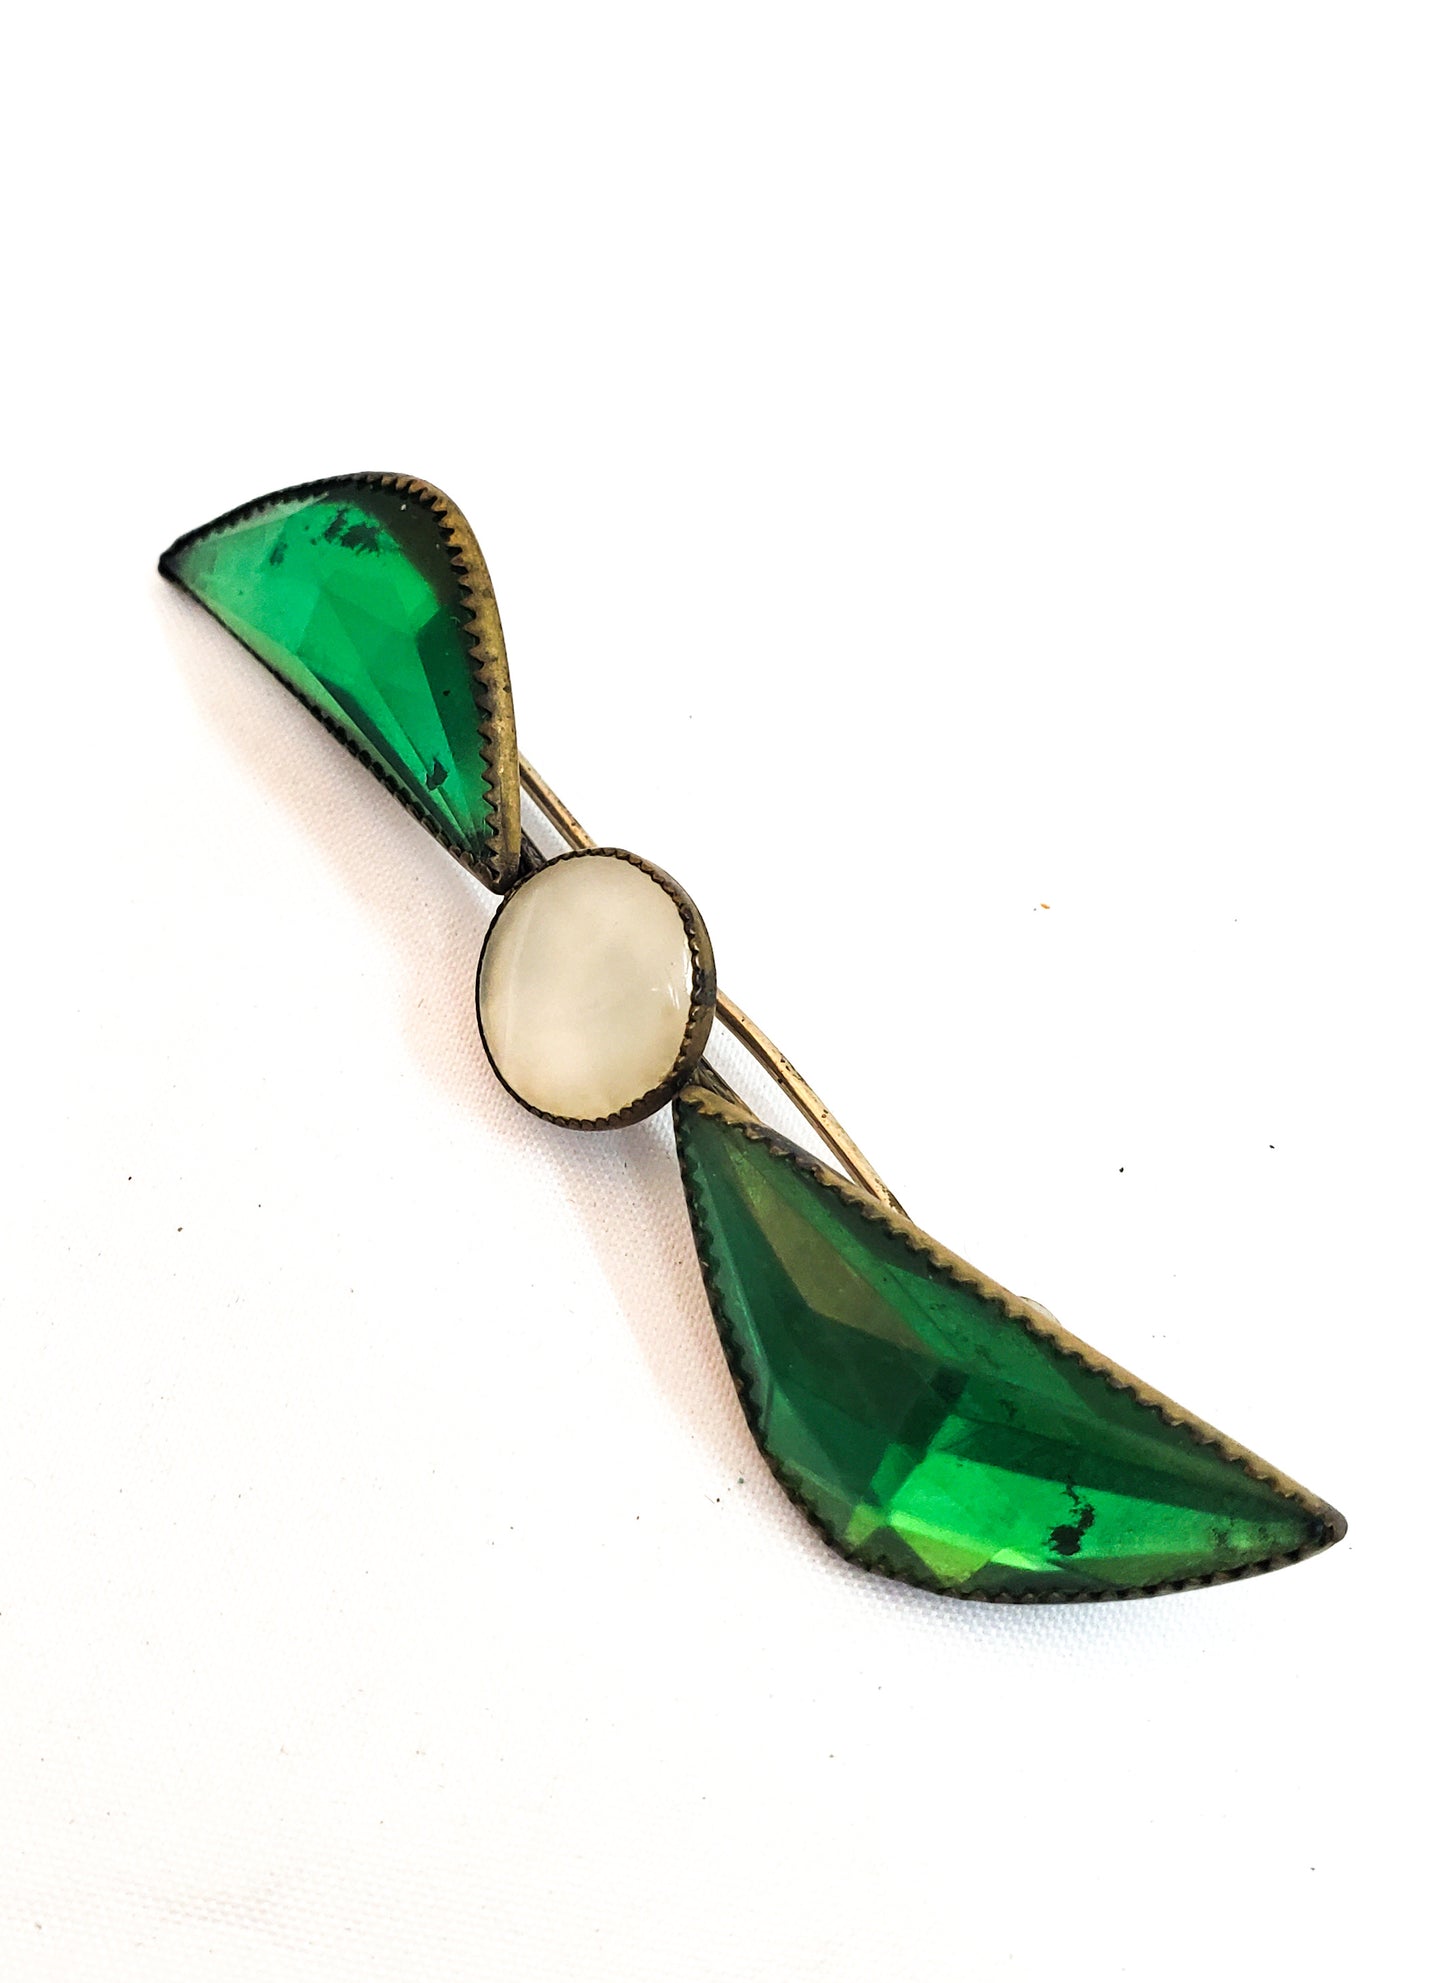 WWI bright green and white Czech glass propeller sweetheart brooch holiday Christmas